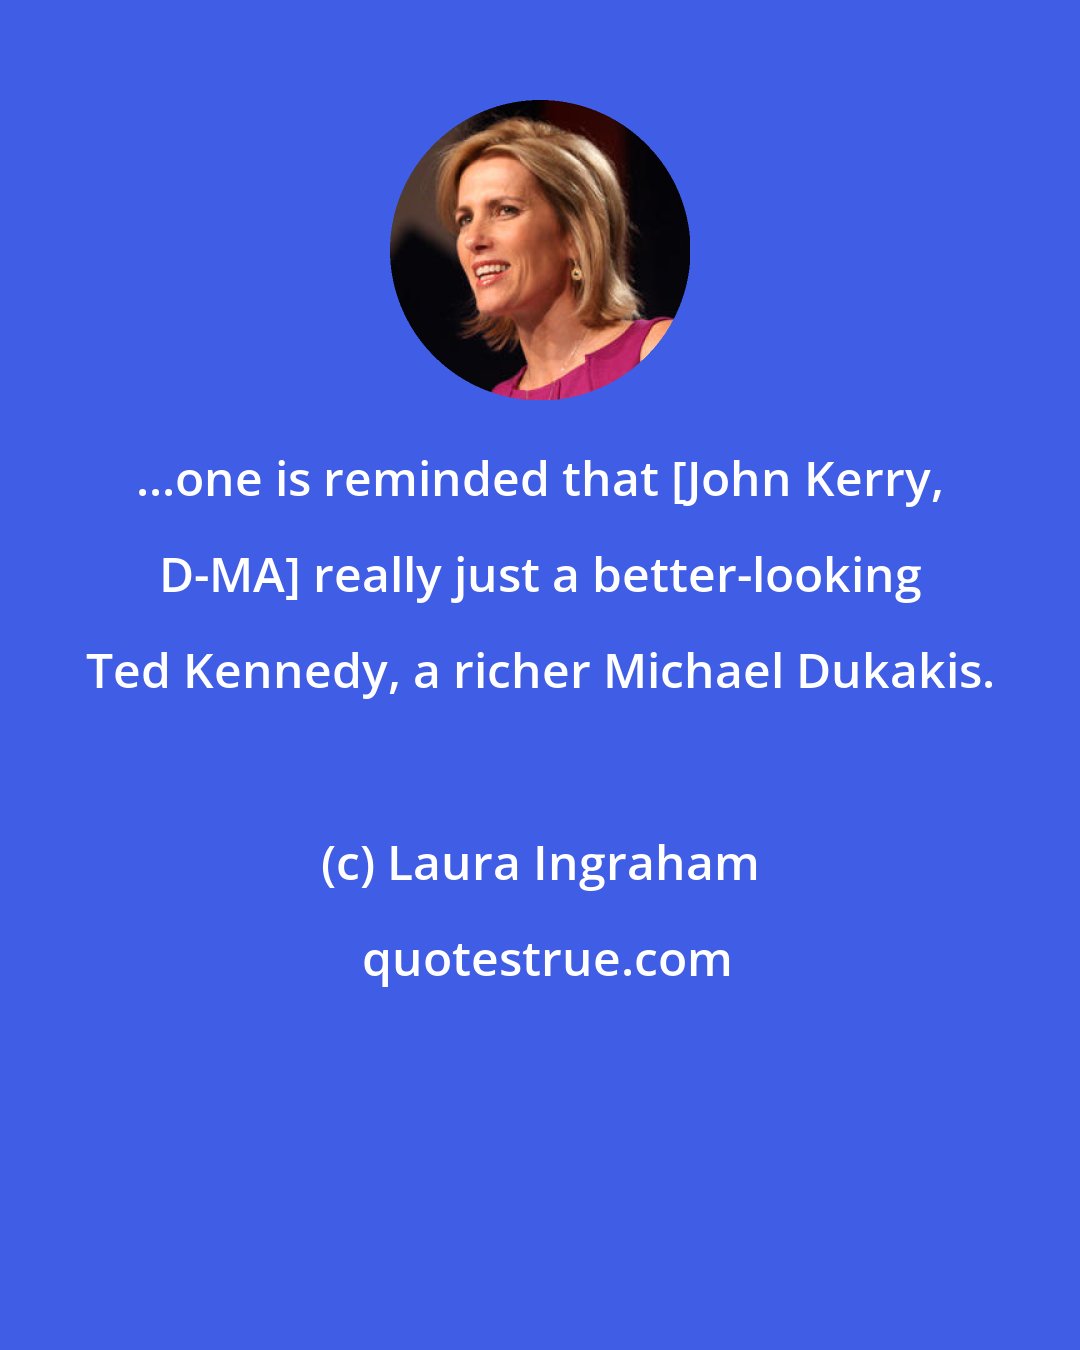 Laura Ingraham: ...one is reminded that [John Kerry, D-MA] really just a better-looking Ted Kennedy, a richer Michael Dukakis.